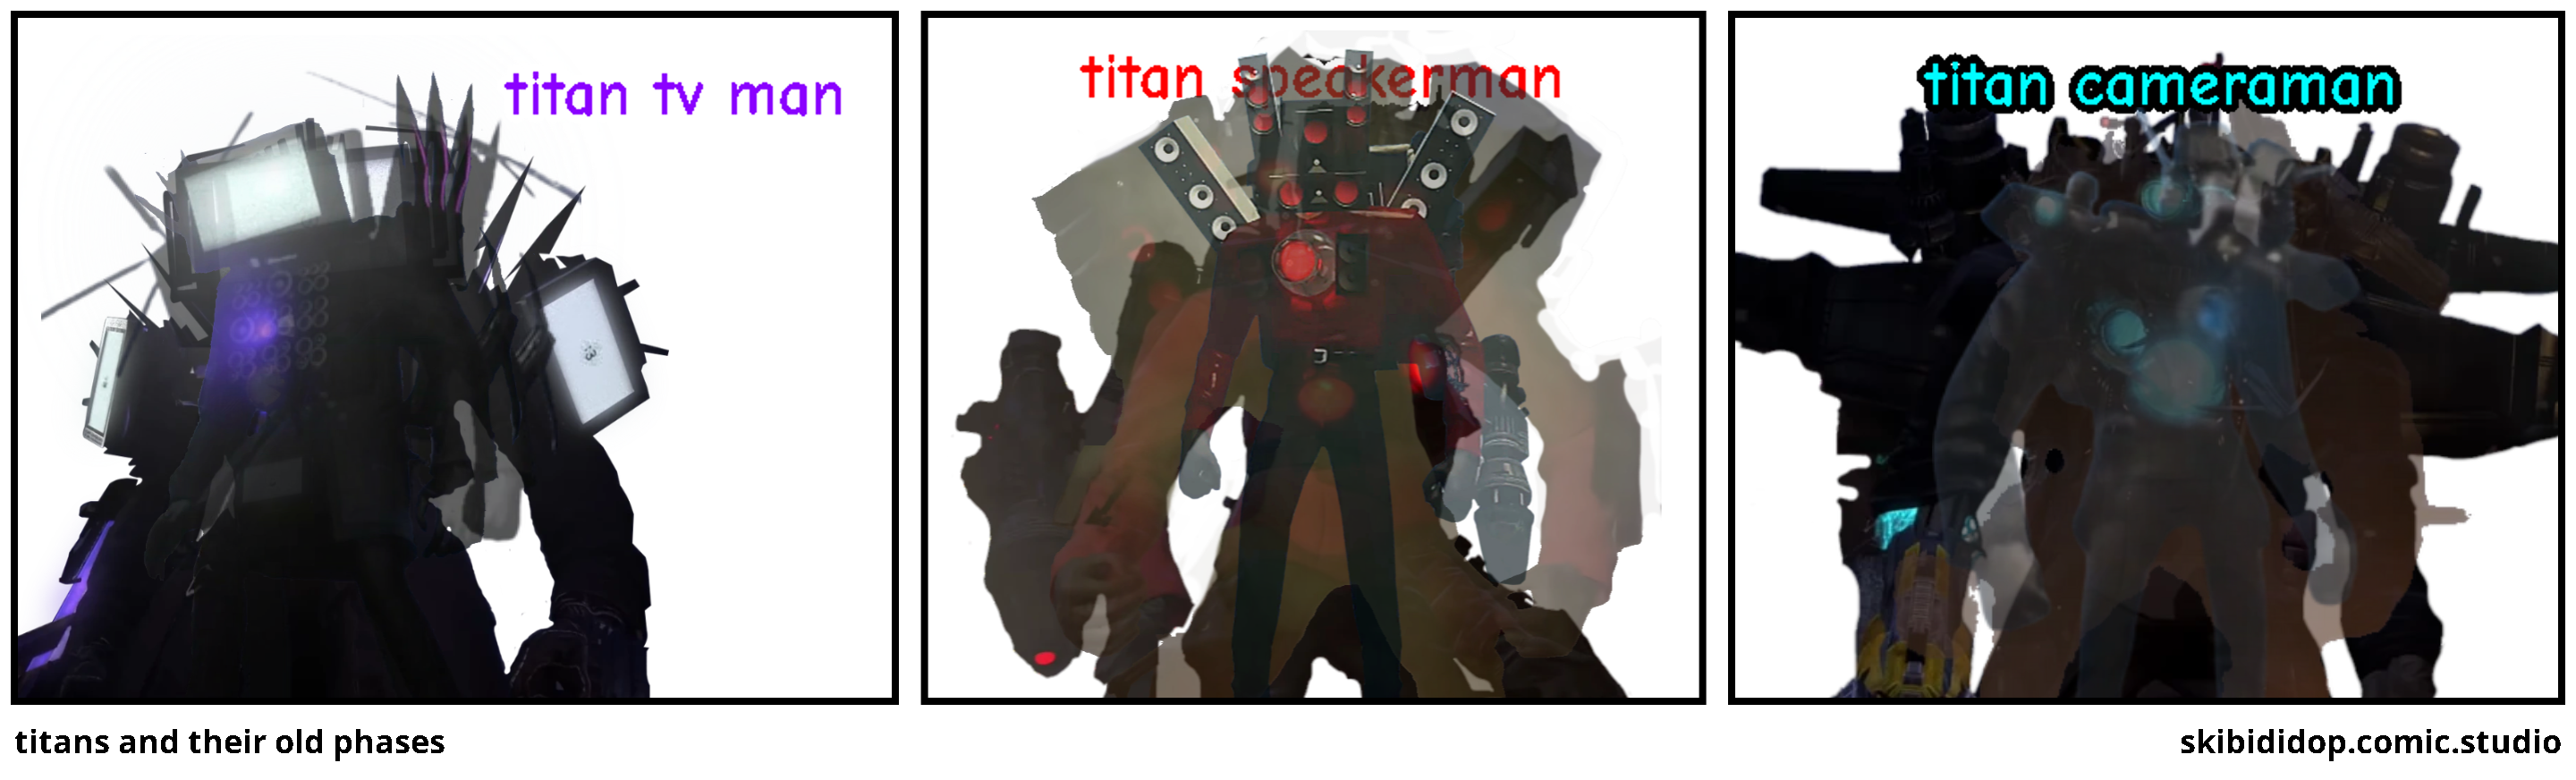 titans and their old phases